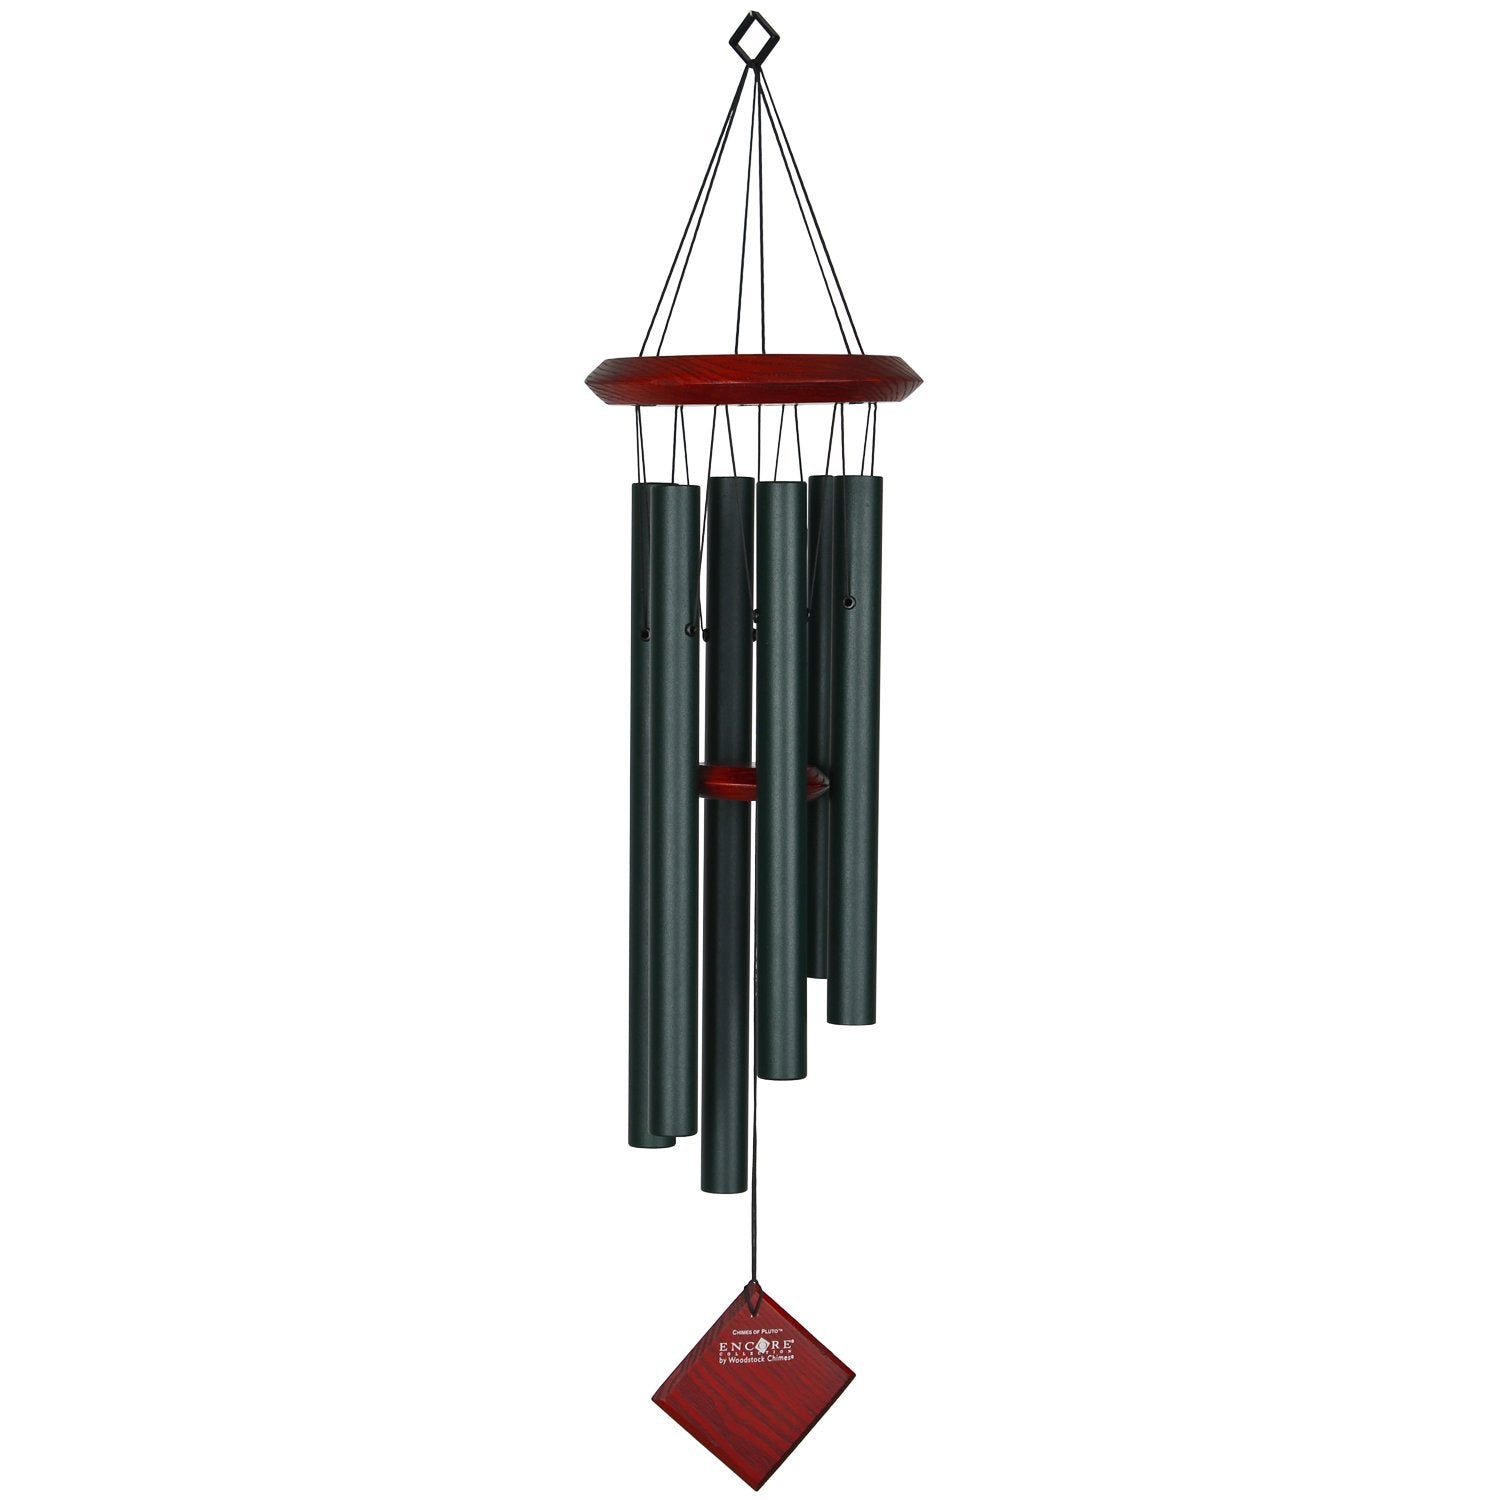 Encore Chimes of Pluto - Evergreen full product image